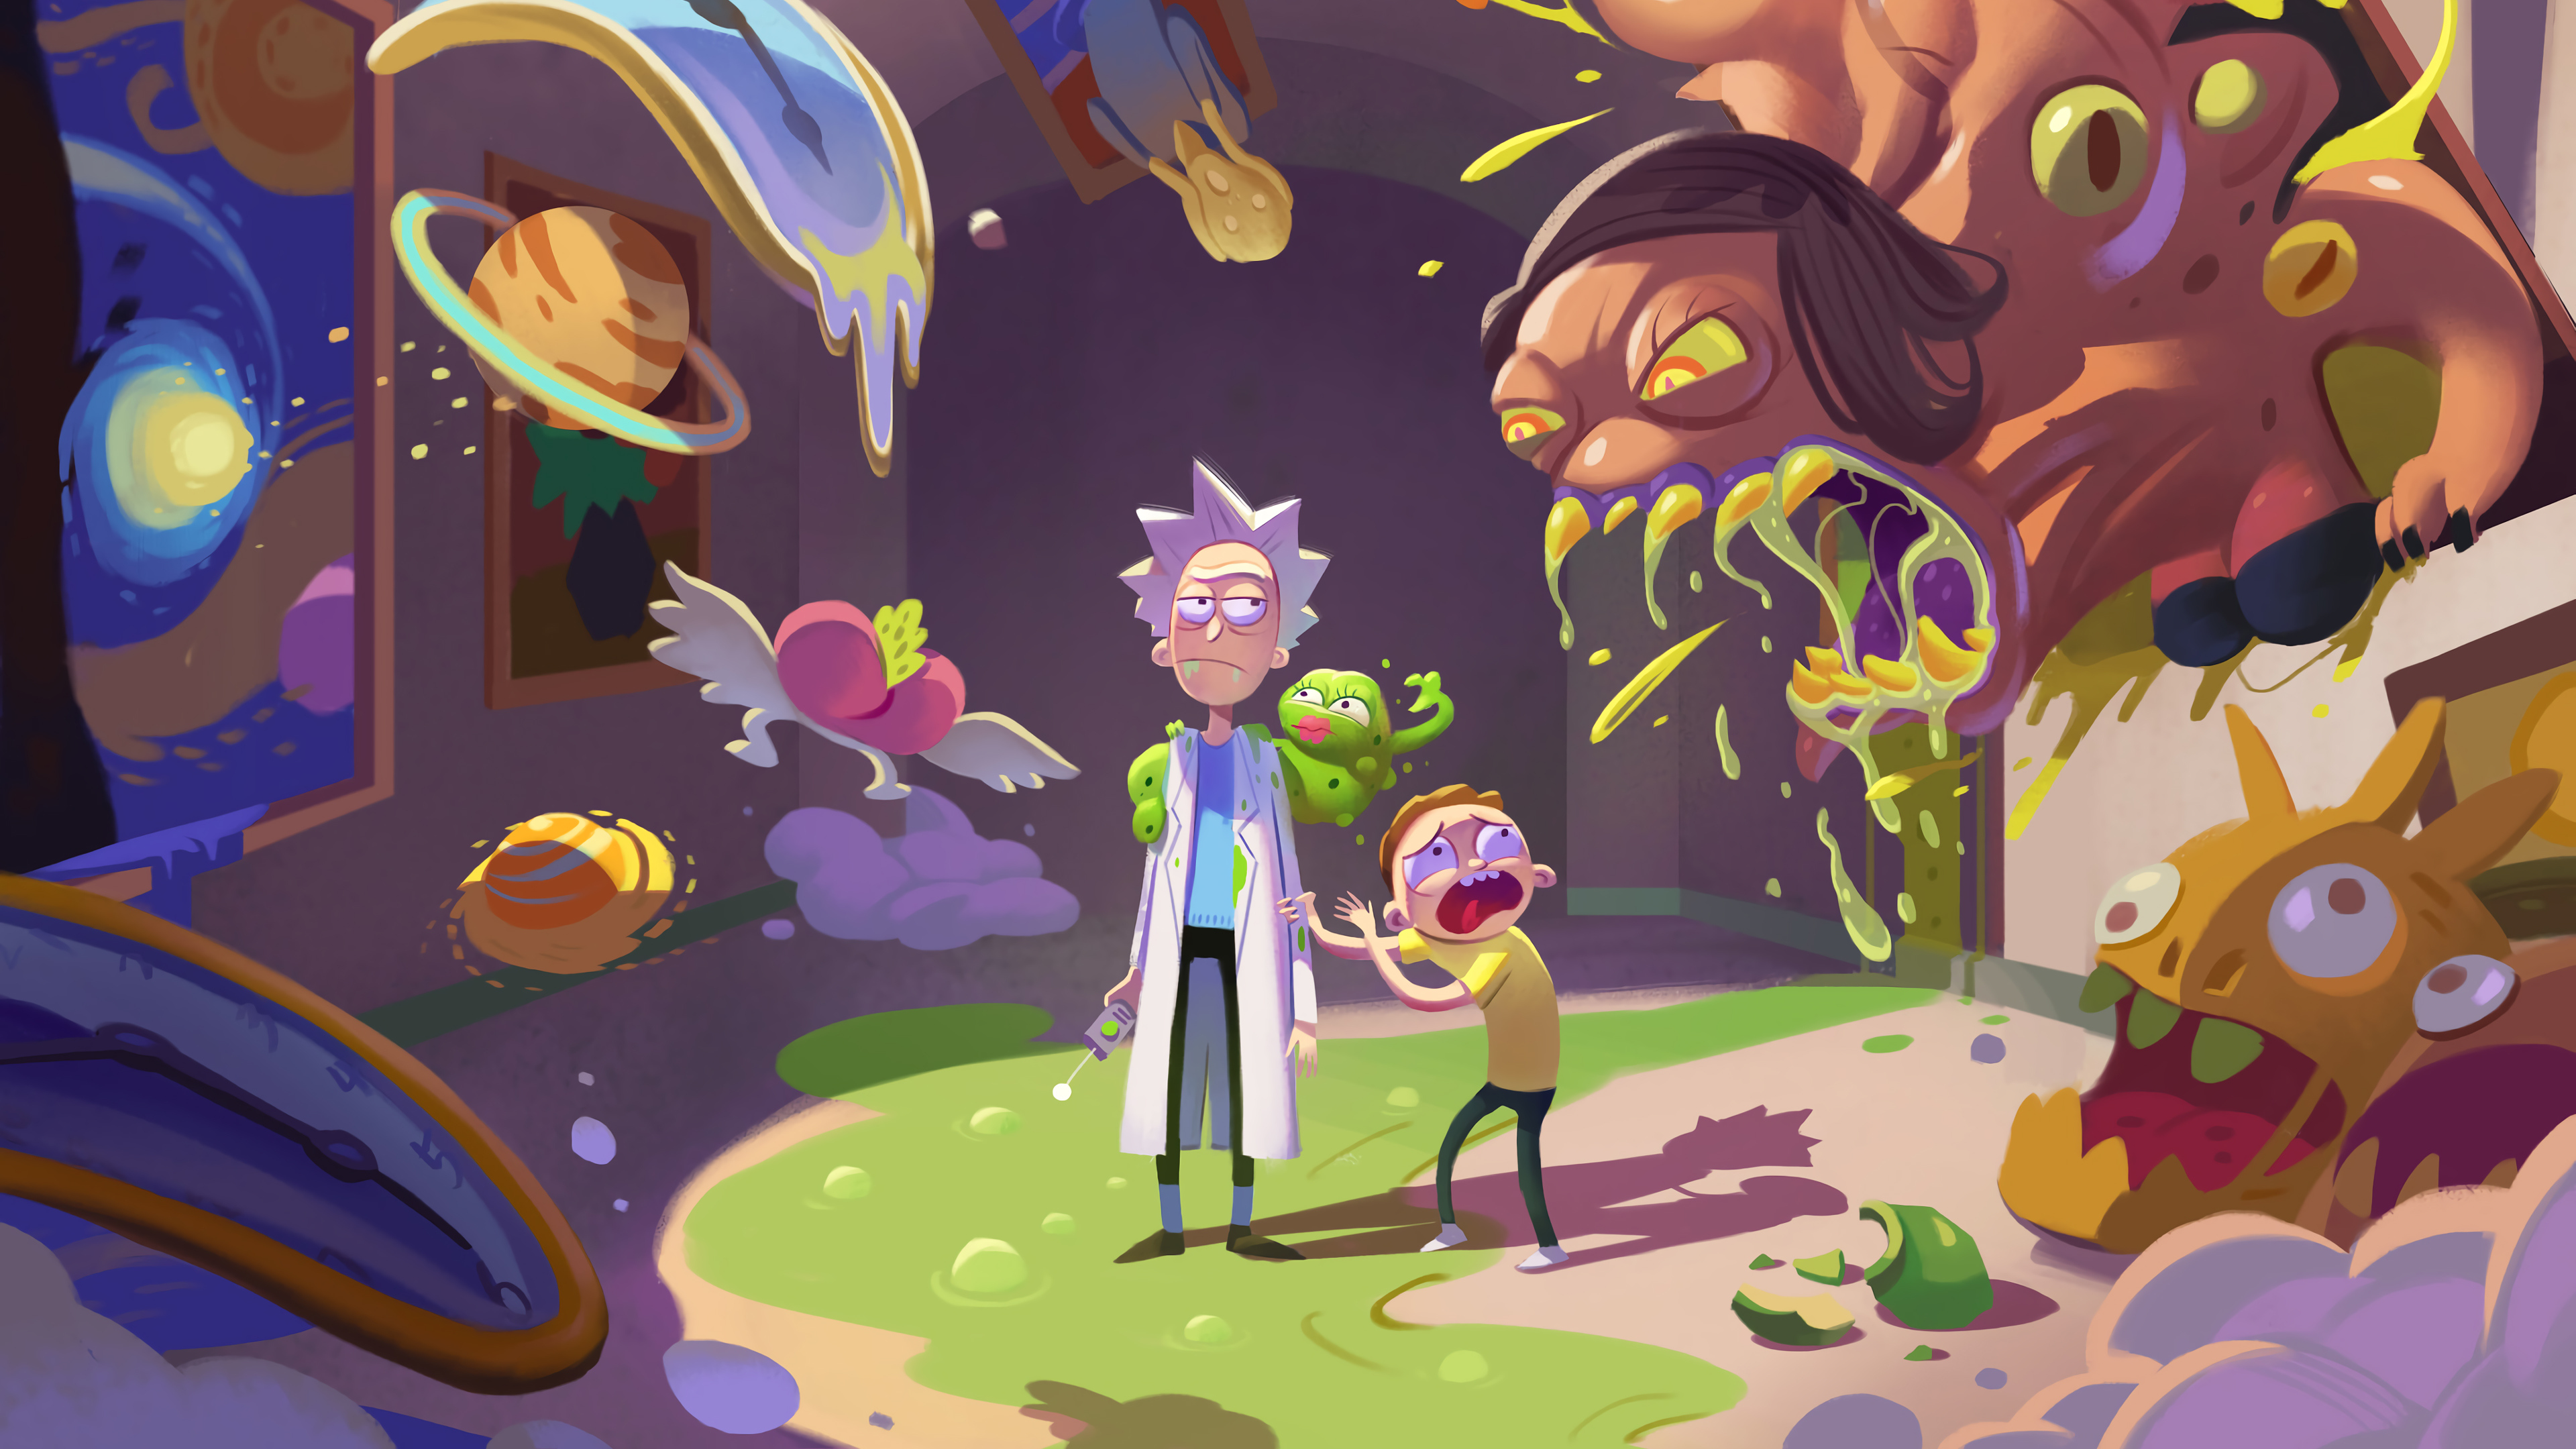 rick and morty, tv show, morty smith, rick sanchez wallpapers for tablet